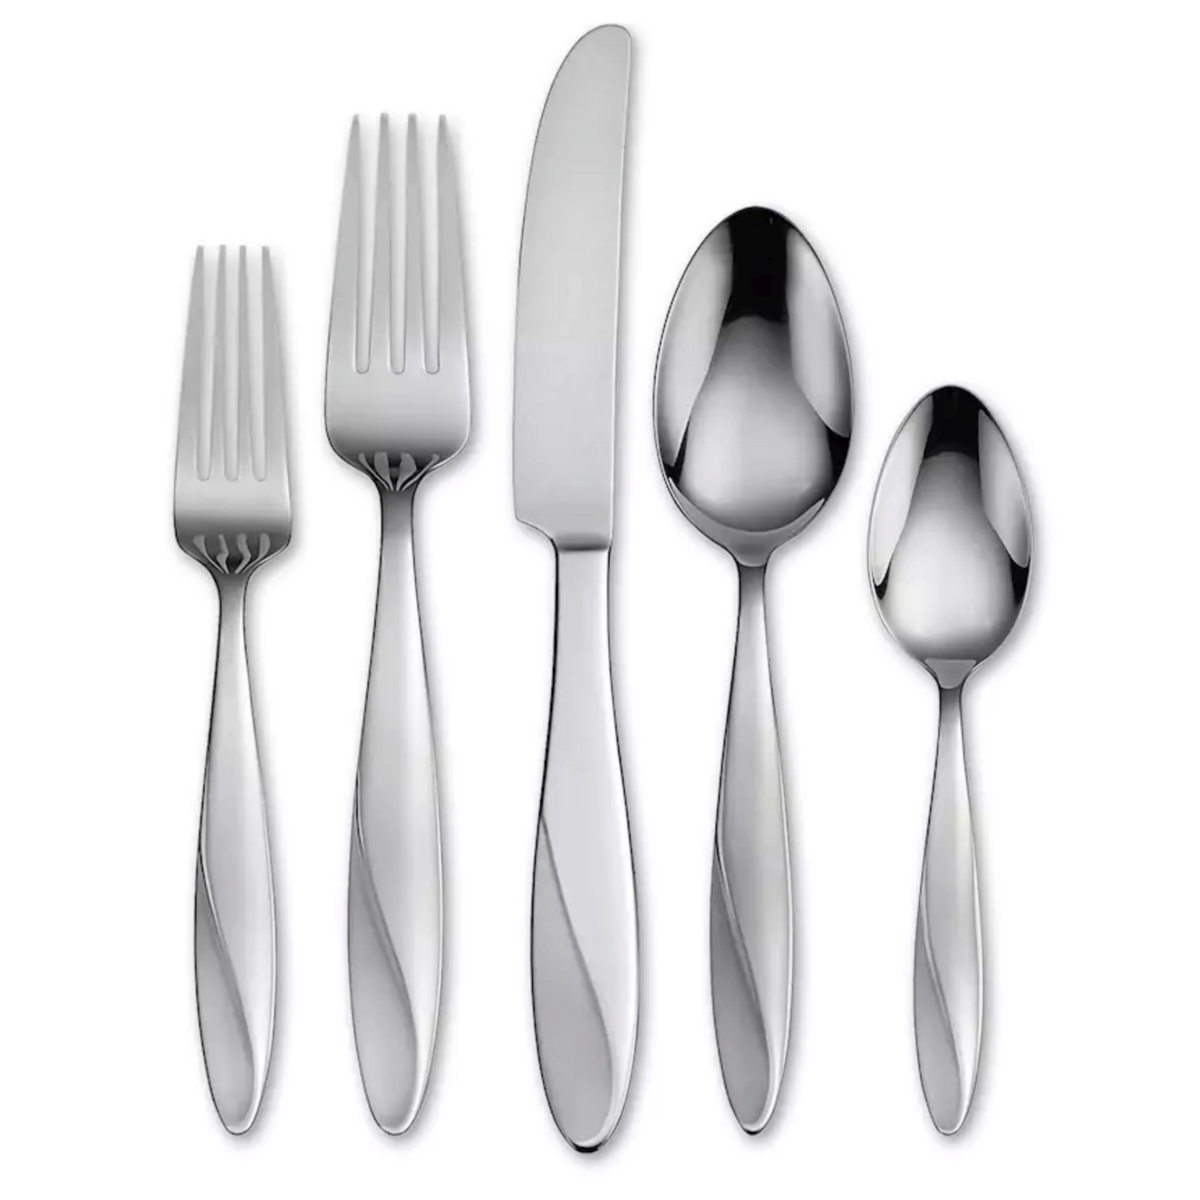 5pc PLACE SETTING ONEIDA COMMUNITY STAINLESS FLATWARE FANTASY PATTERN 8 IN STOCK